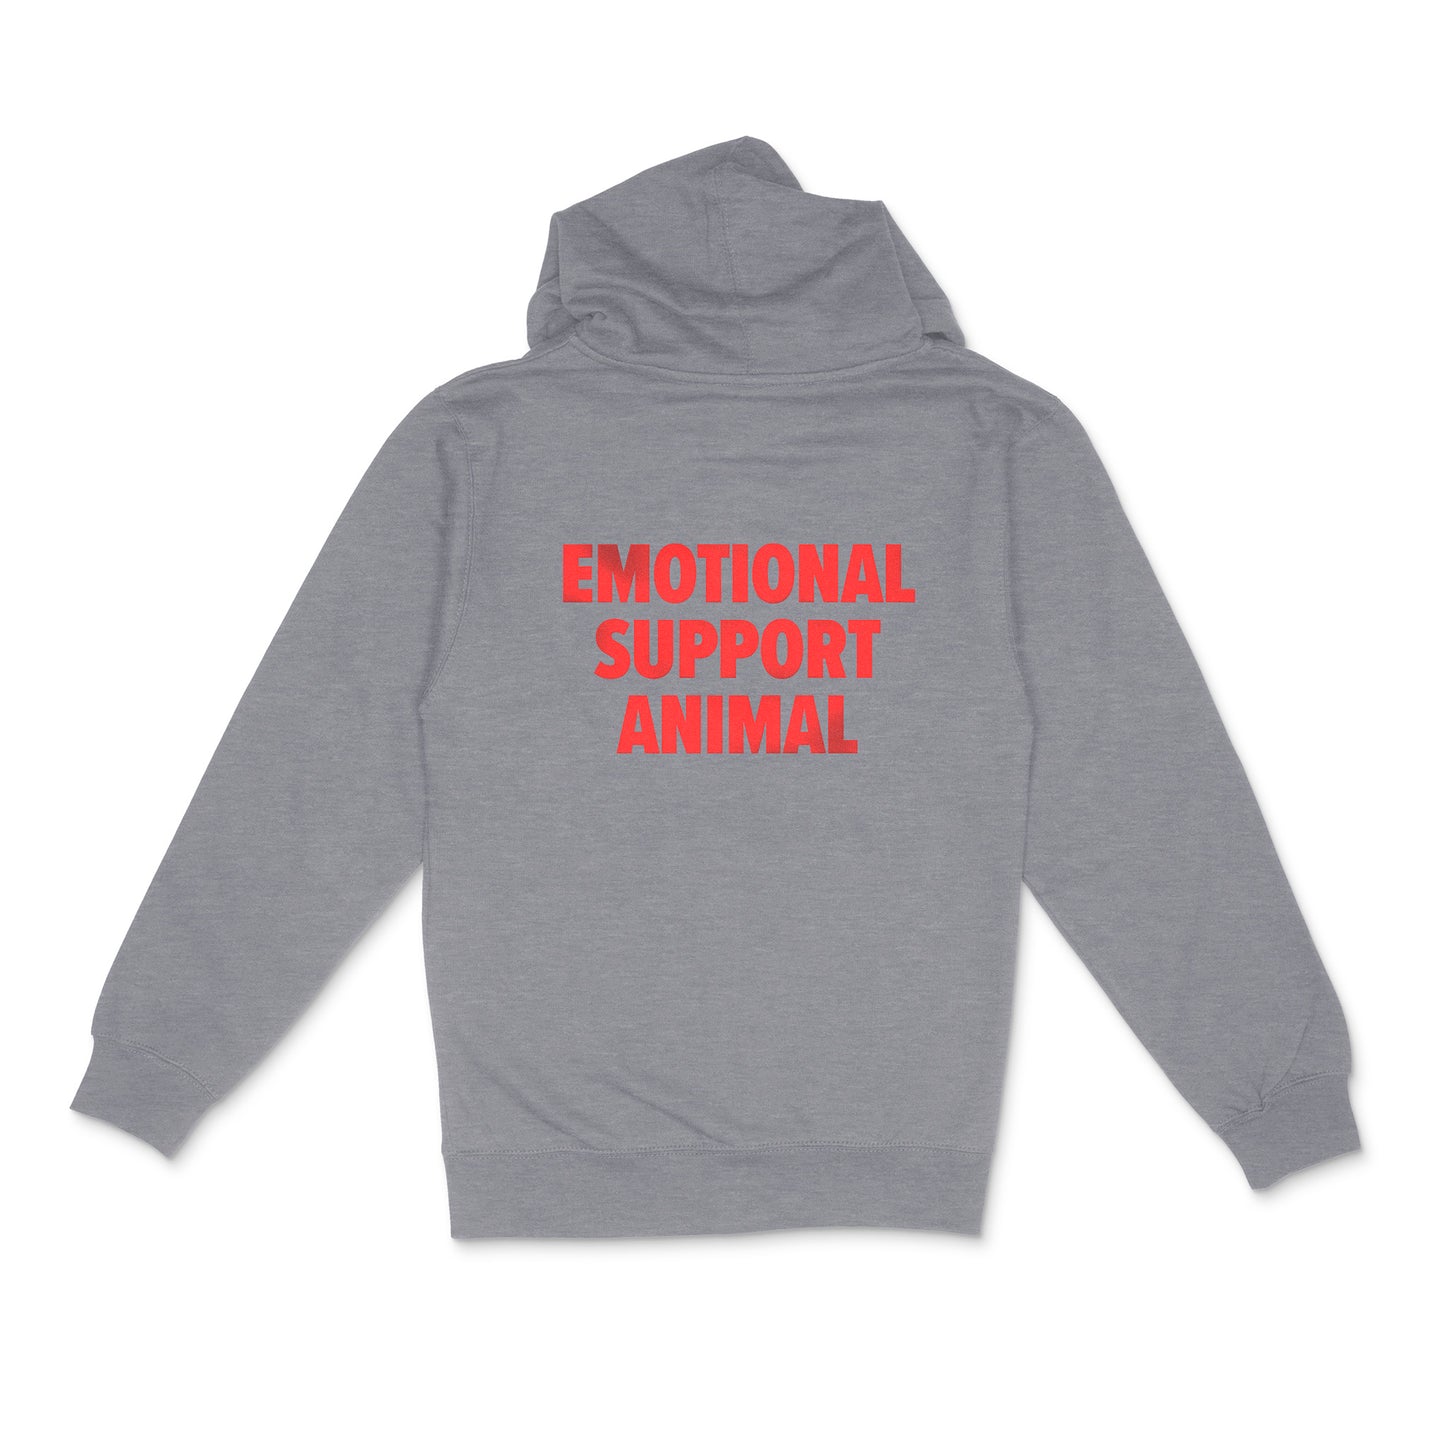 gunmetal heather unisex zip hoodie with custom sample text "Emotional Support Animal" in red metallic, tall text style across full back of garment 